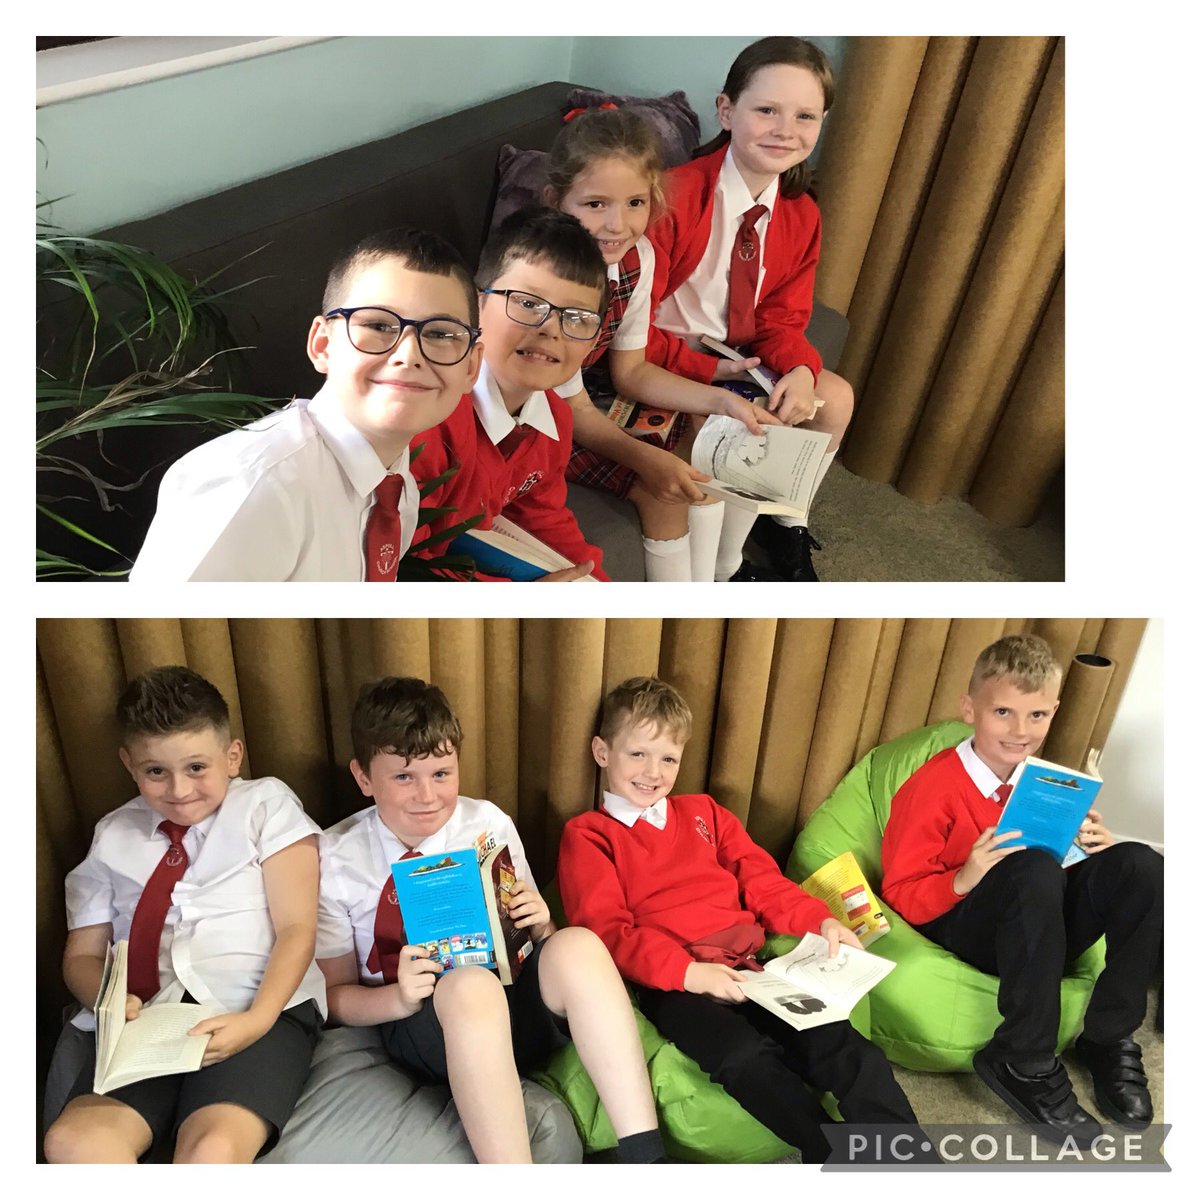 Yesterday we enjoyed the first chapter of our new class novel ‘Kensuke’s Kingdom’ sat in our new school nurture area. #acpsEnglish